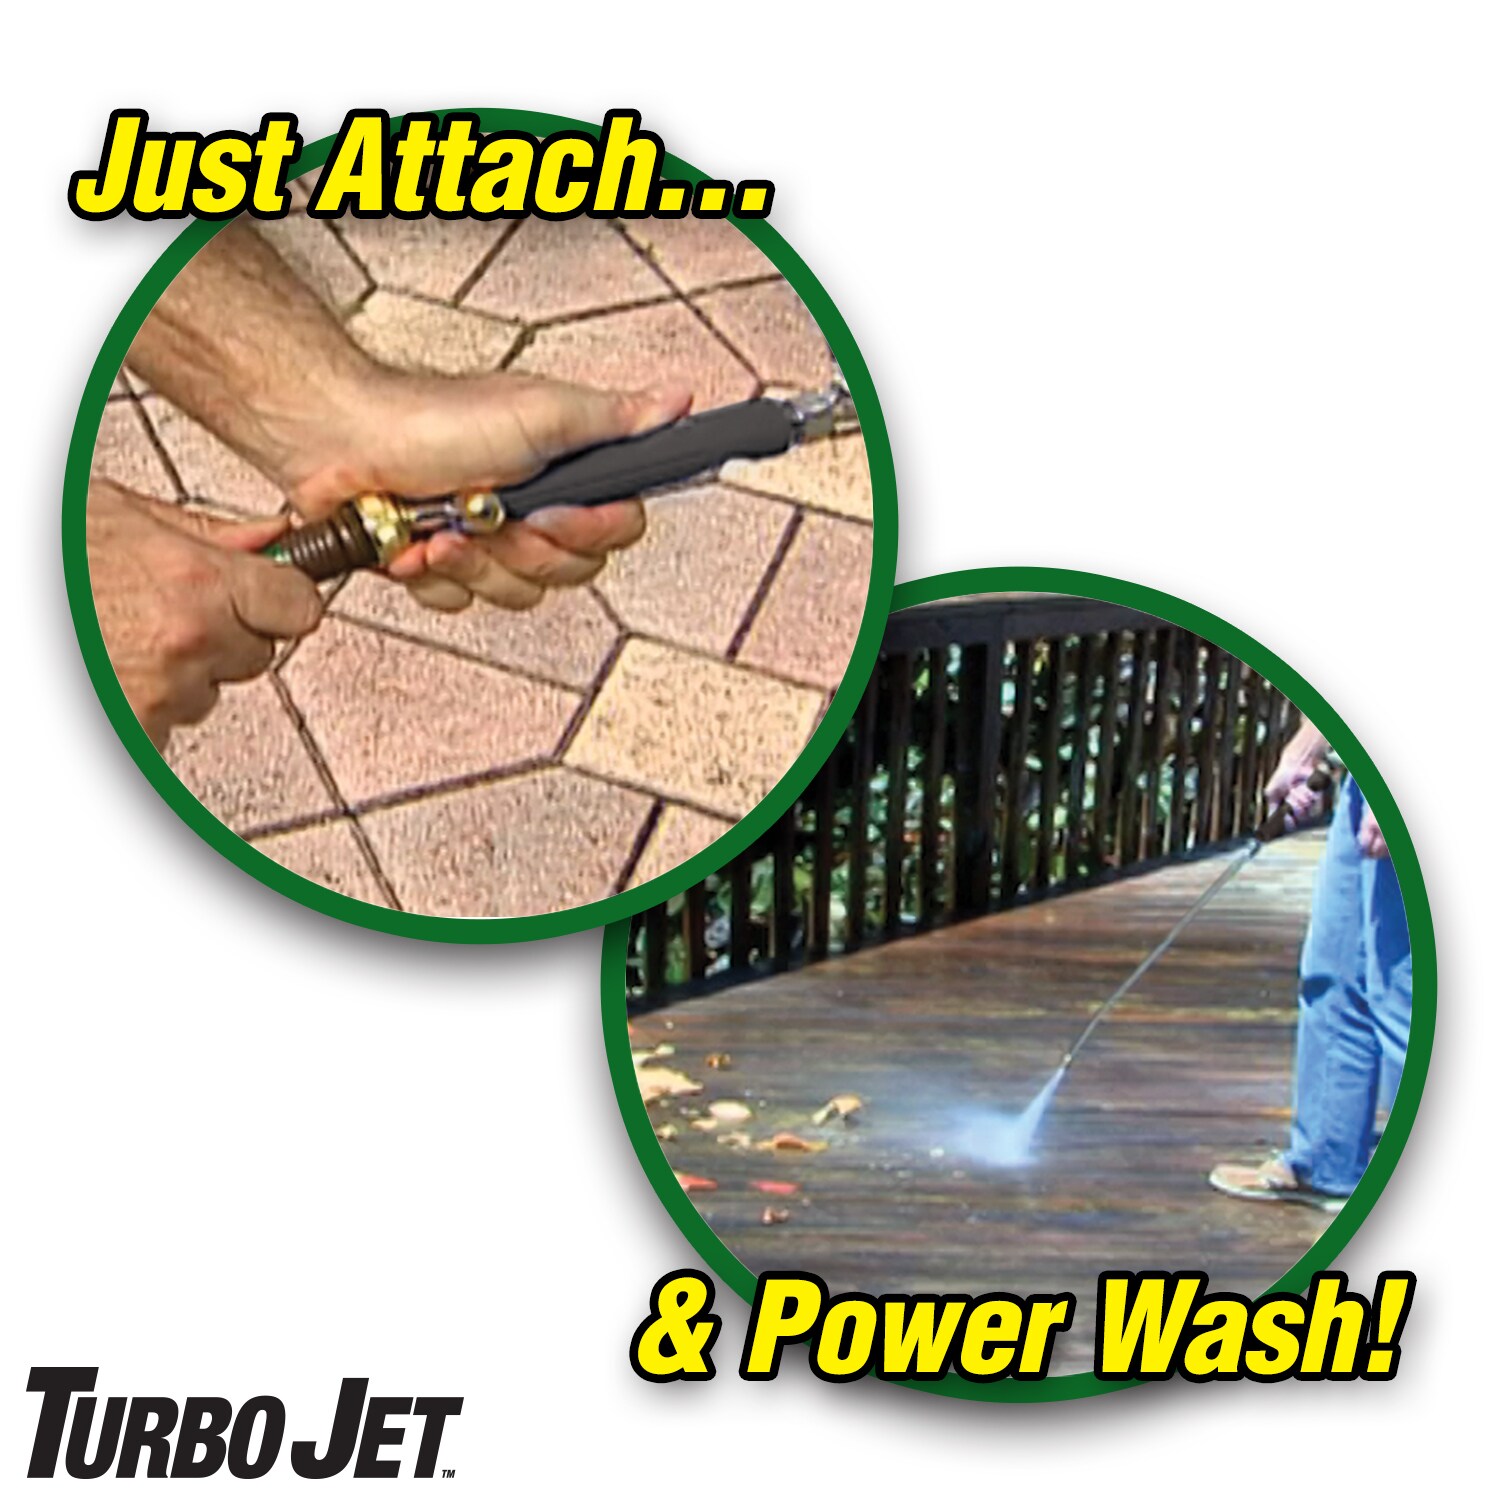 Turbo Jet Power Washer Turn Any Hose Into A Power Washer As Seen On TV 